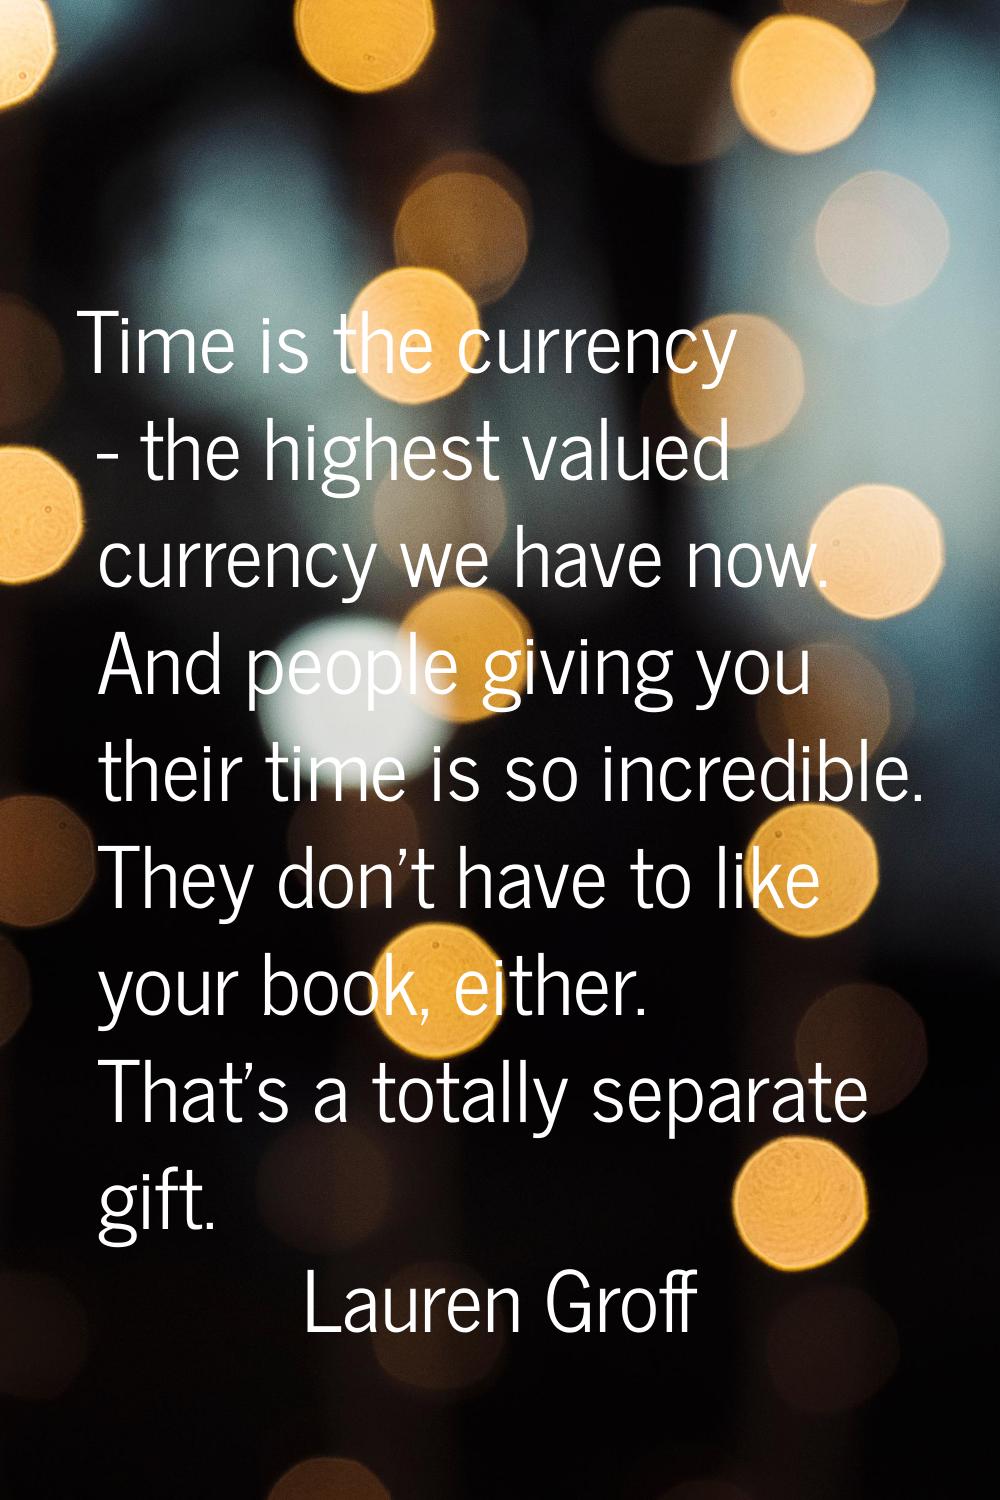 Time is the currency - the highest valued currency we have now. And people giving you their time is